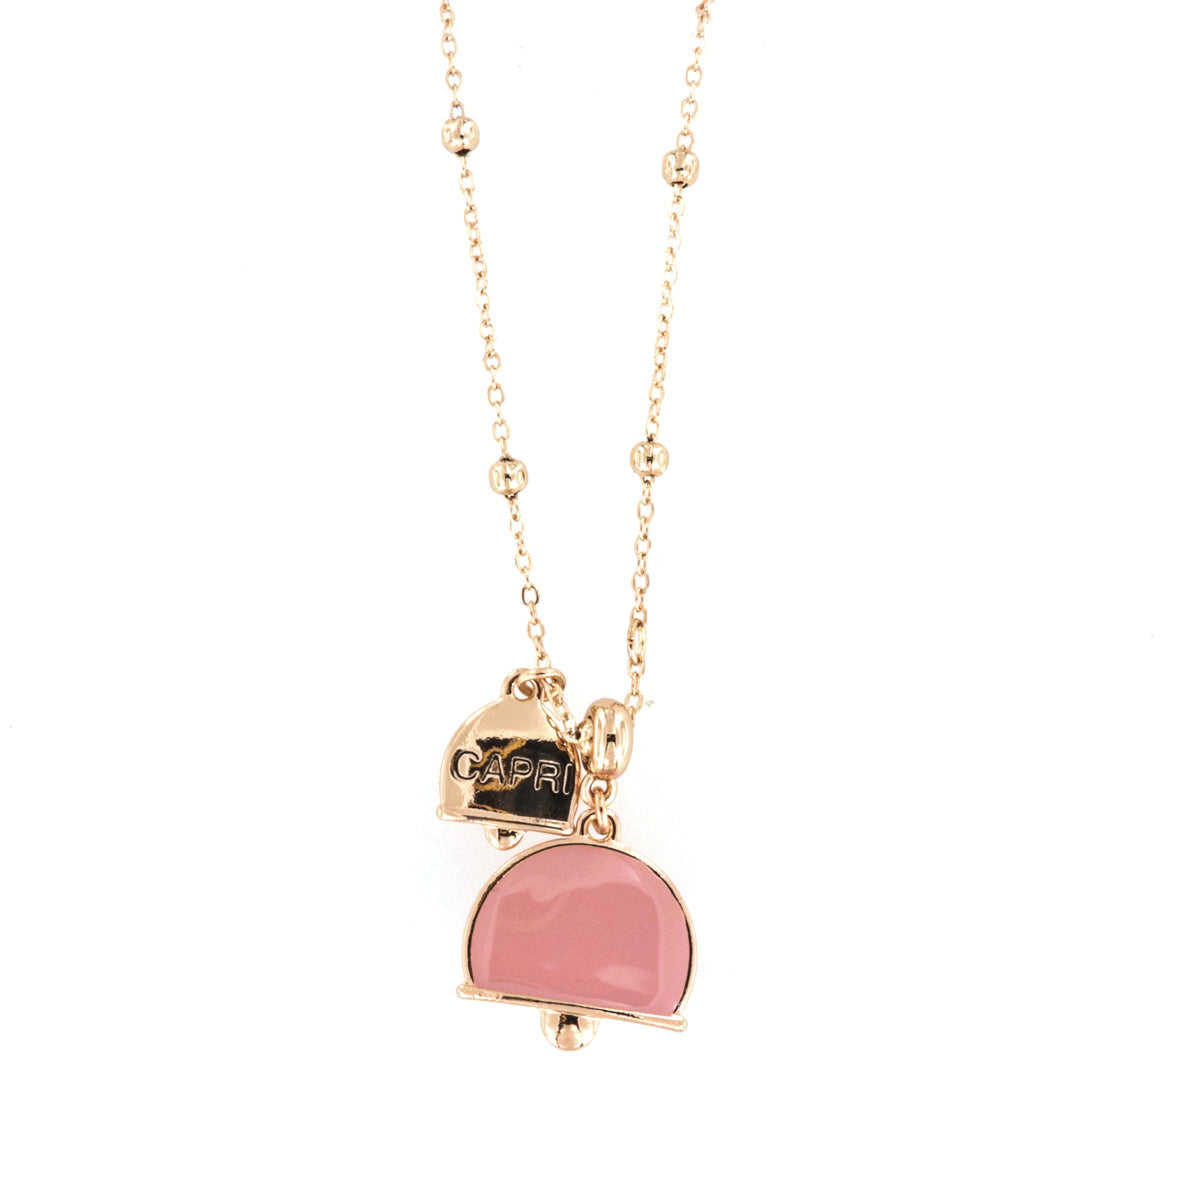 Metal necklace with double -crushed double charm, embellished with pink enamel